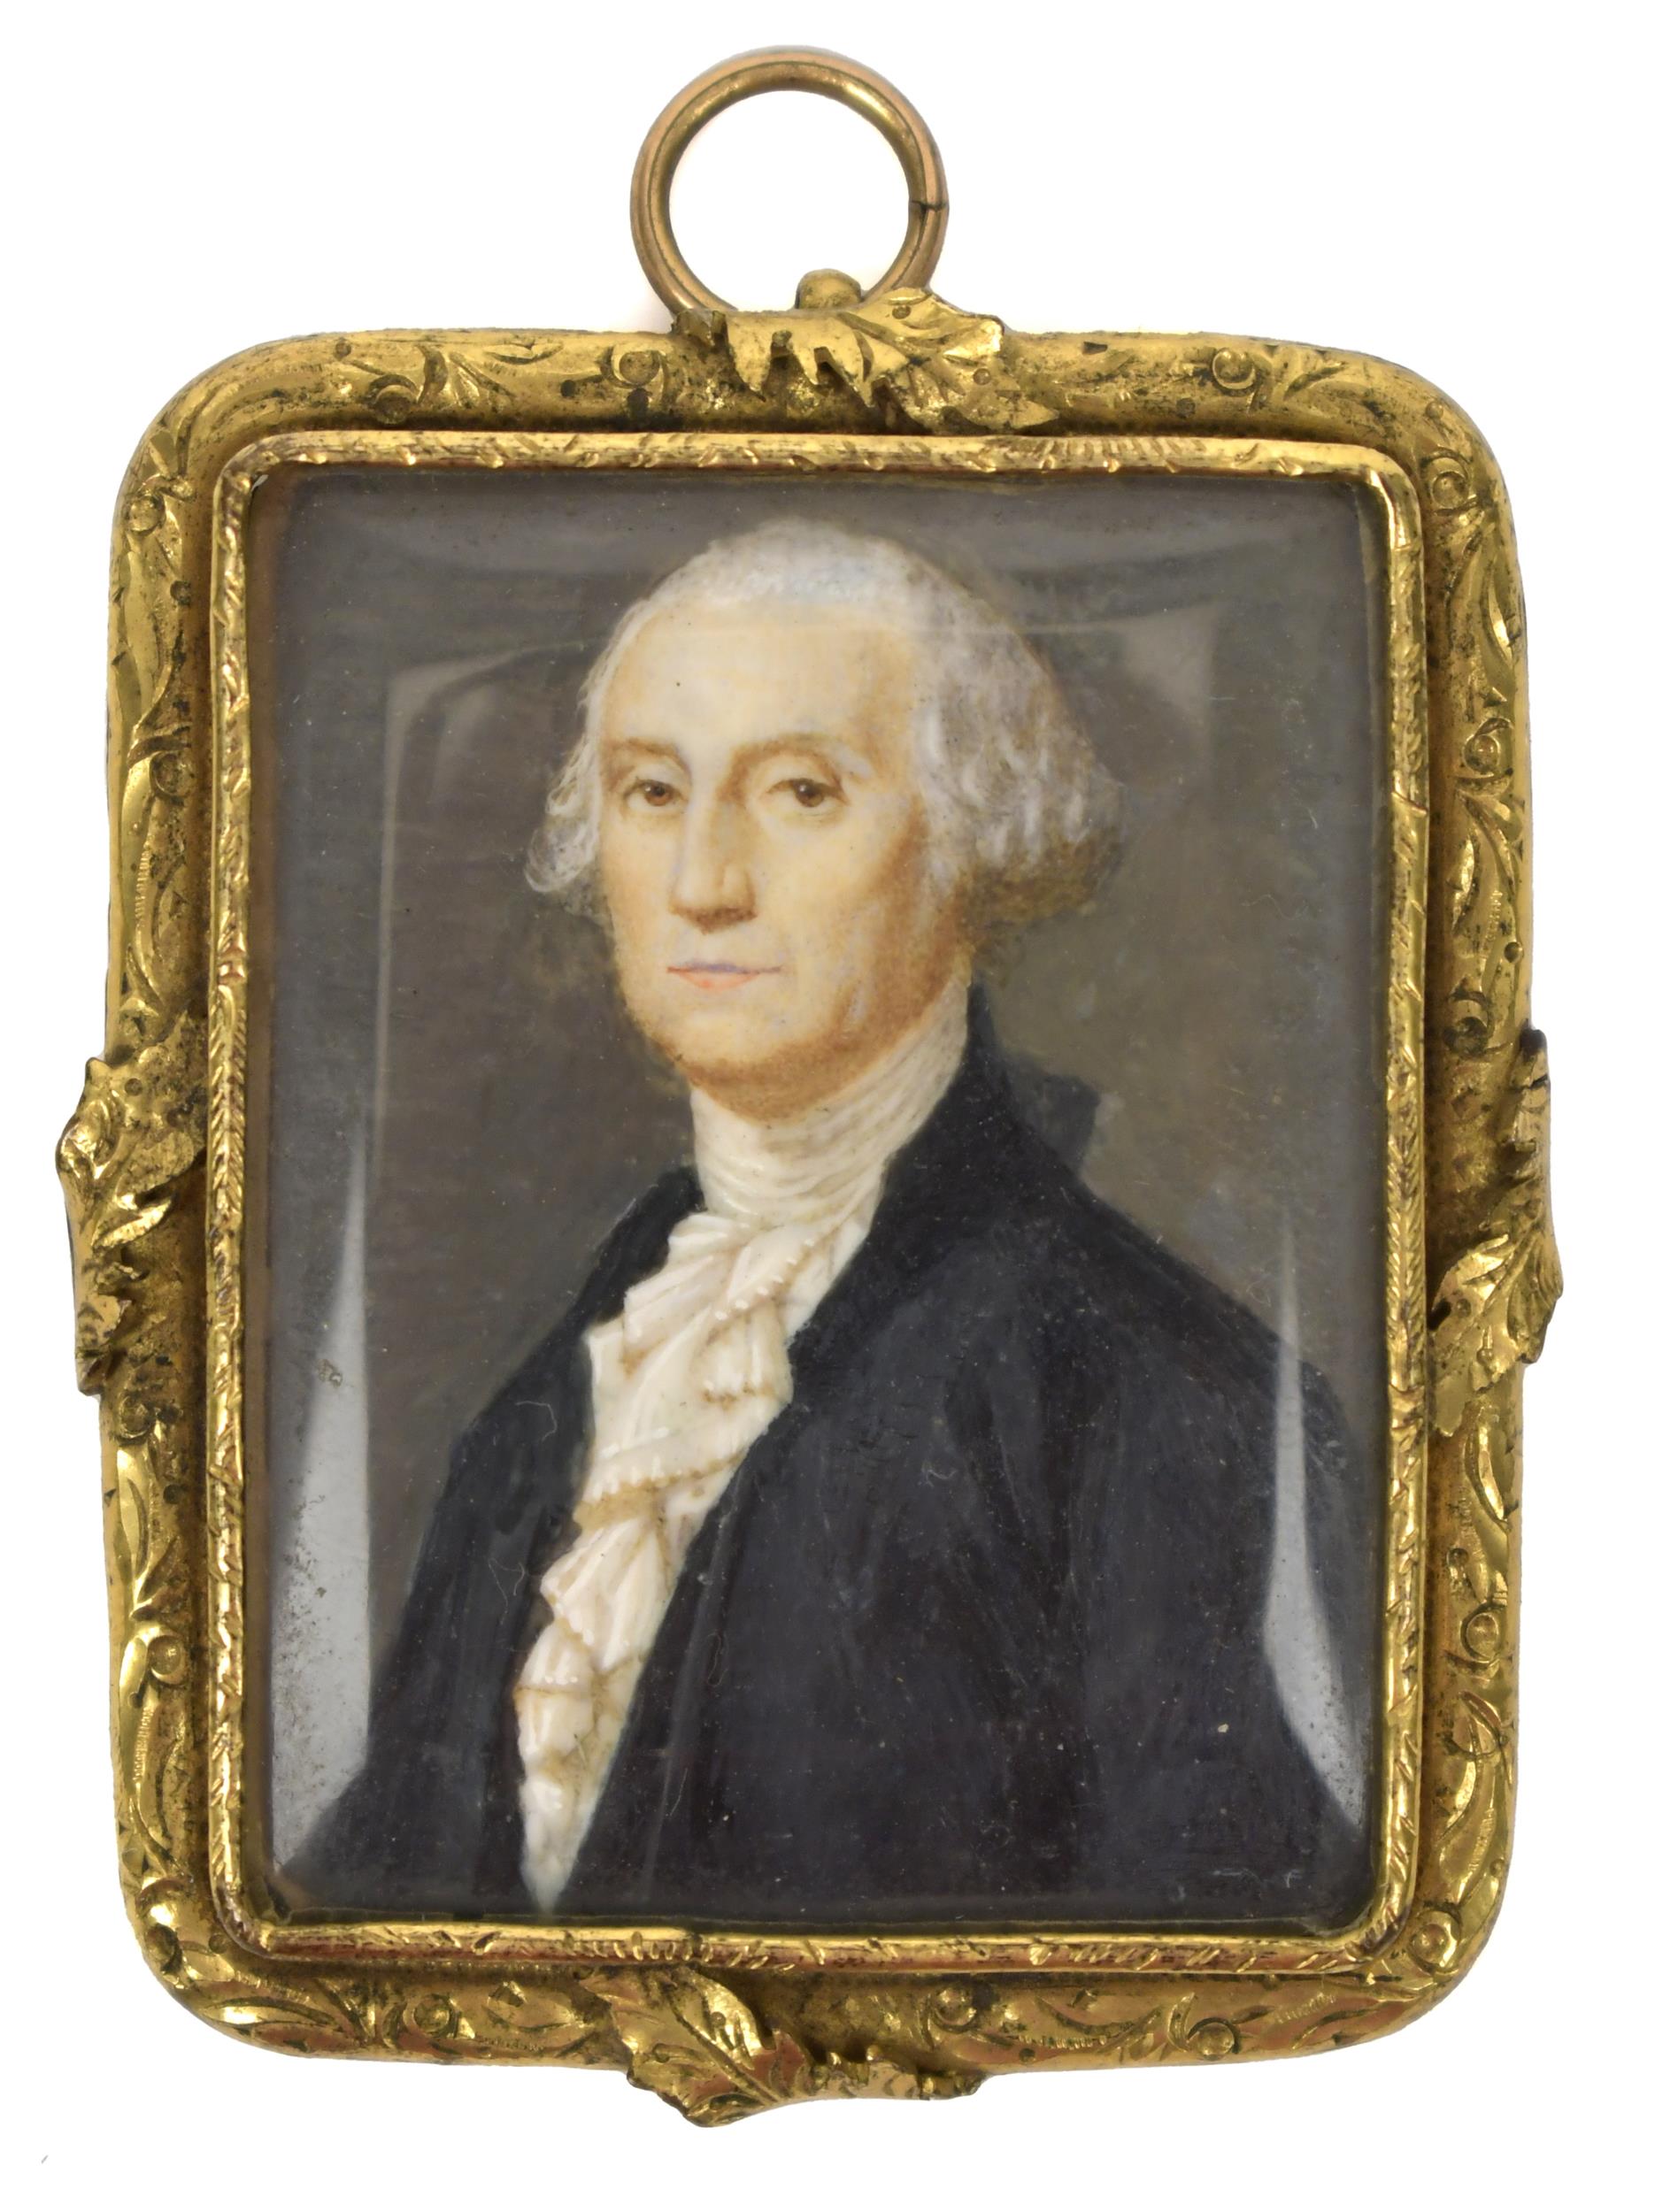 EARLY 19TH C. MINIATURE PAINTING, GEORGE